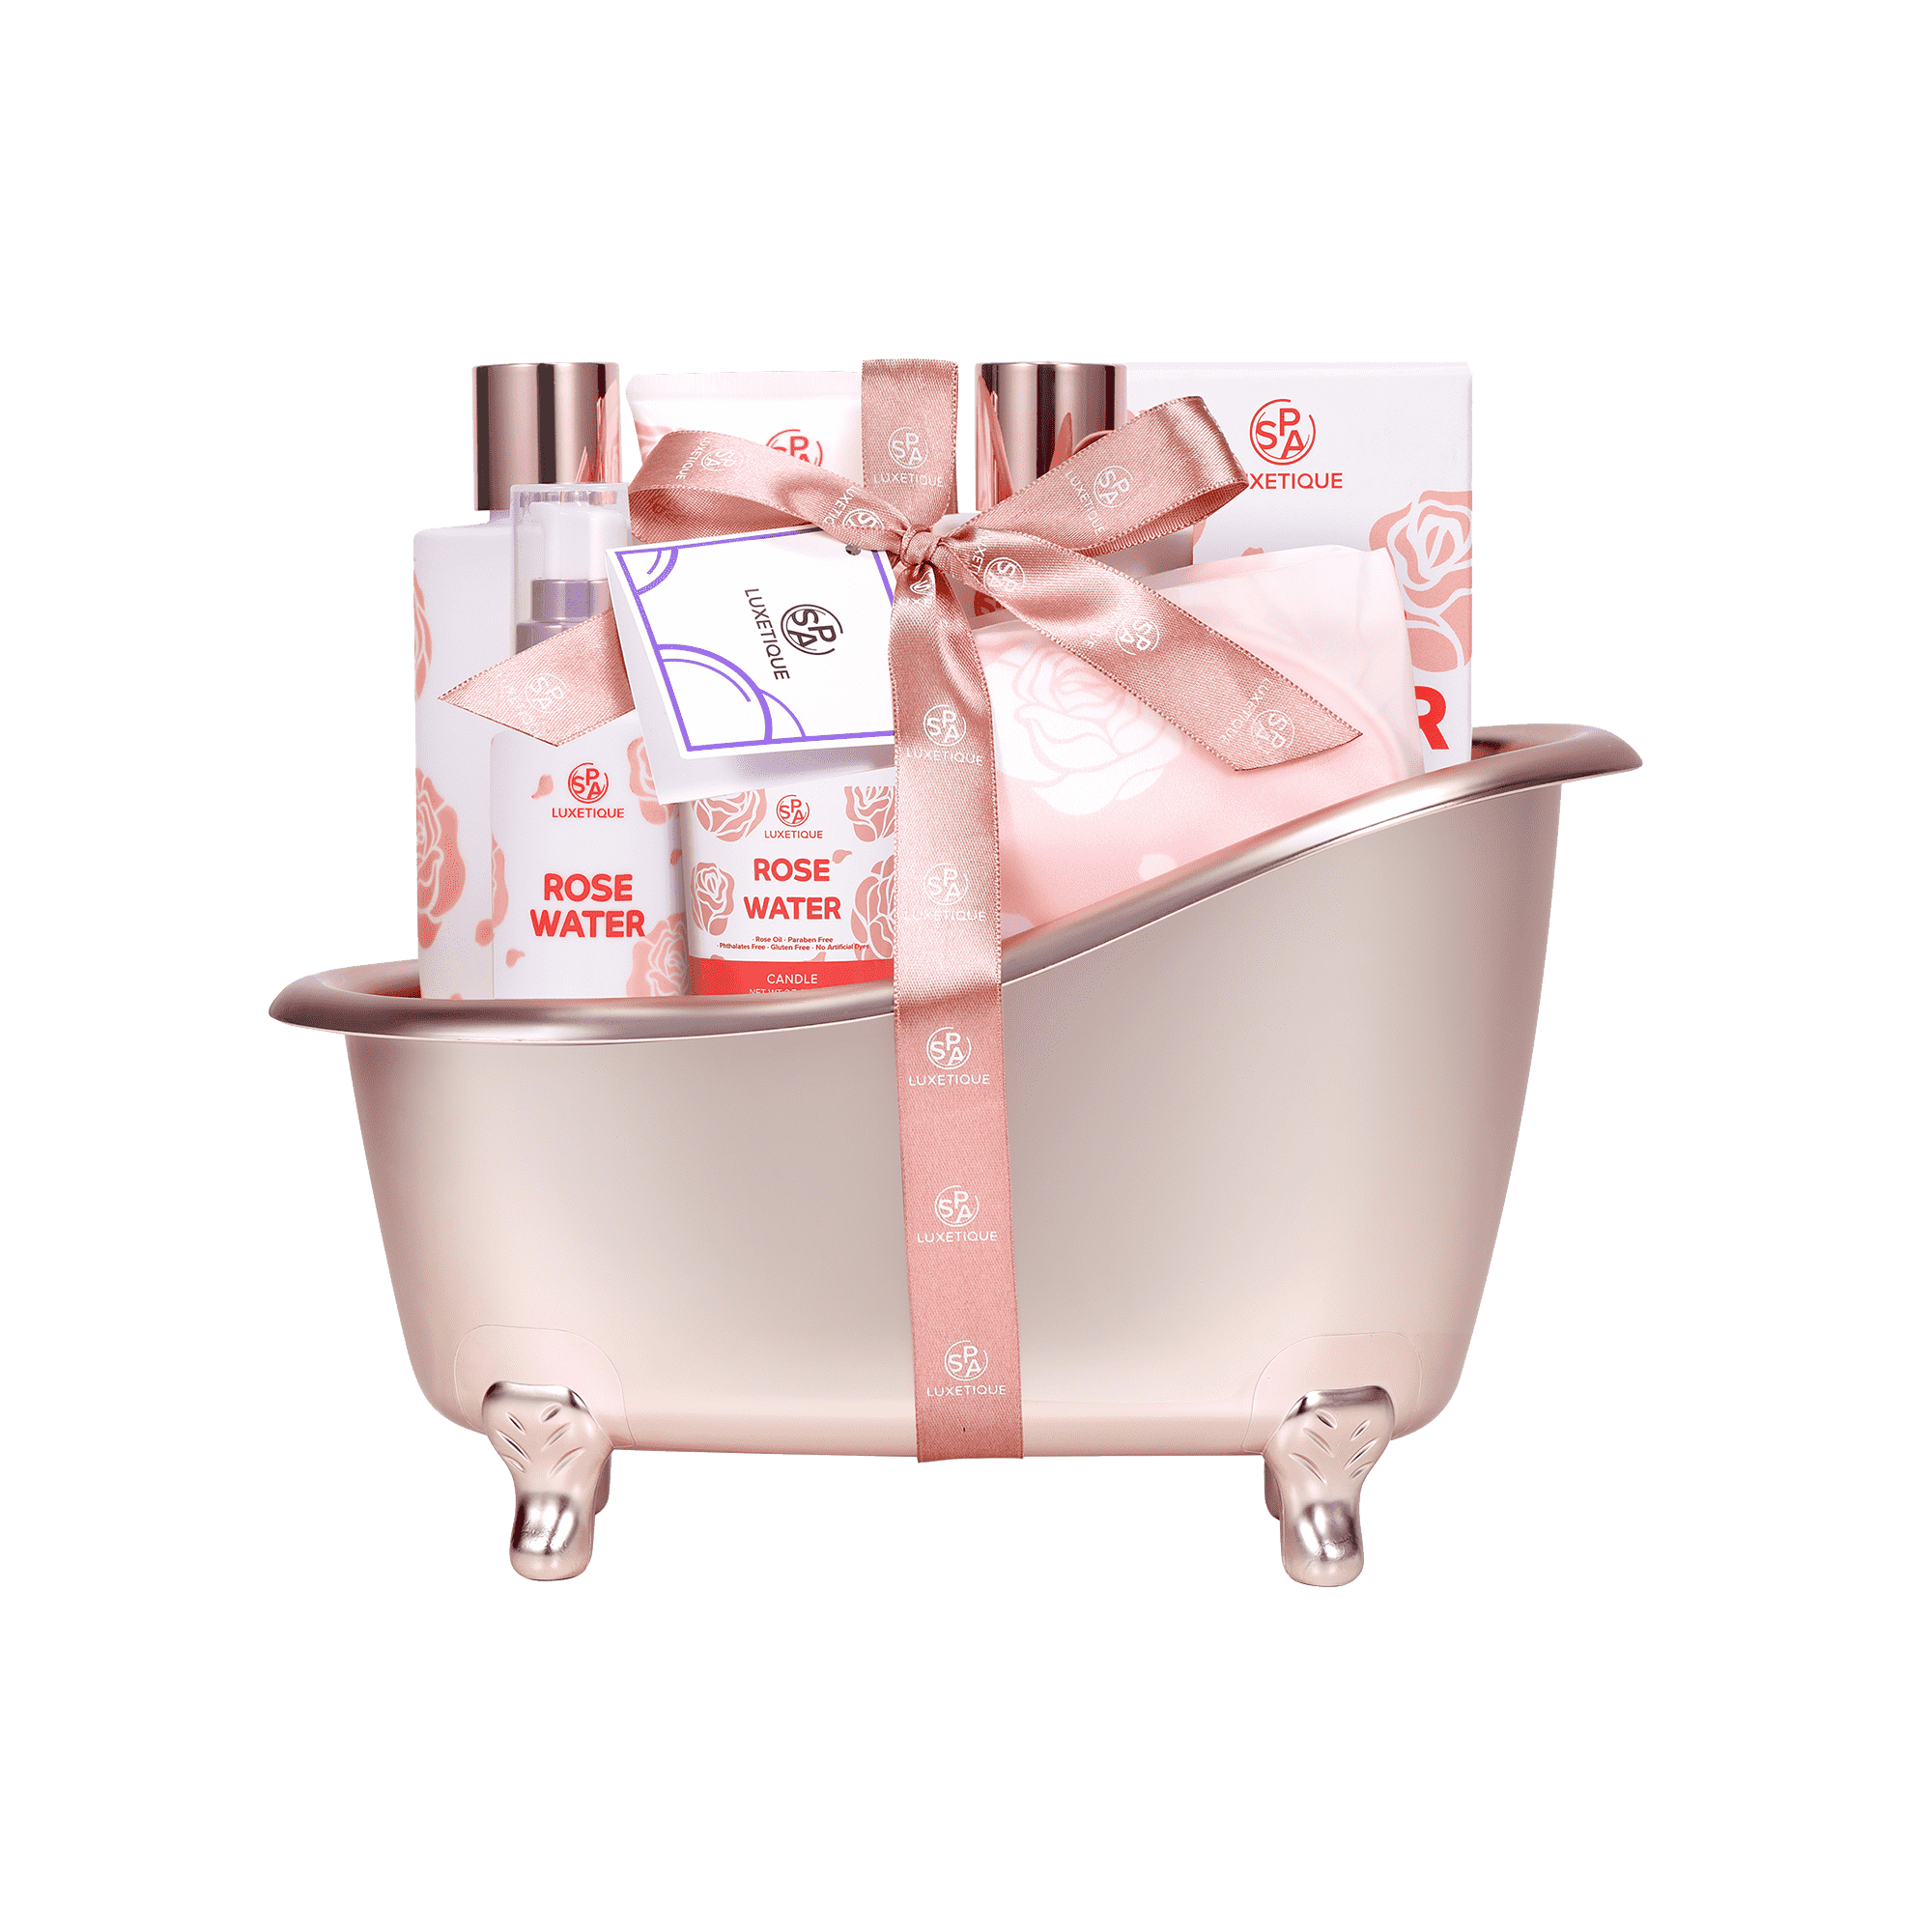 Spa Luxetique Gift Sets for Women - 12 Pcs Lavender Scent Bath Baskets,  Beauty Valentines Gifts for Her - Walmart.com